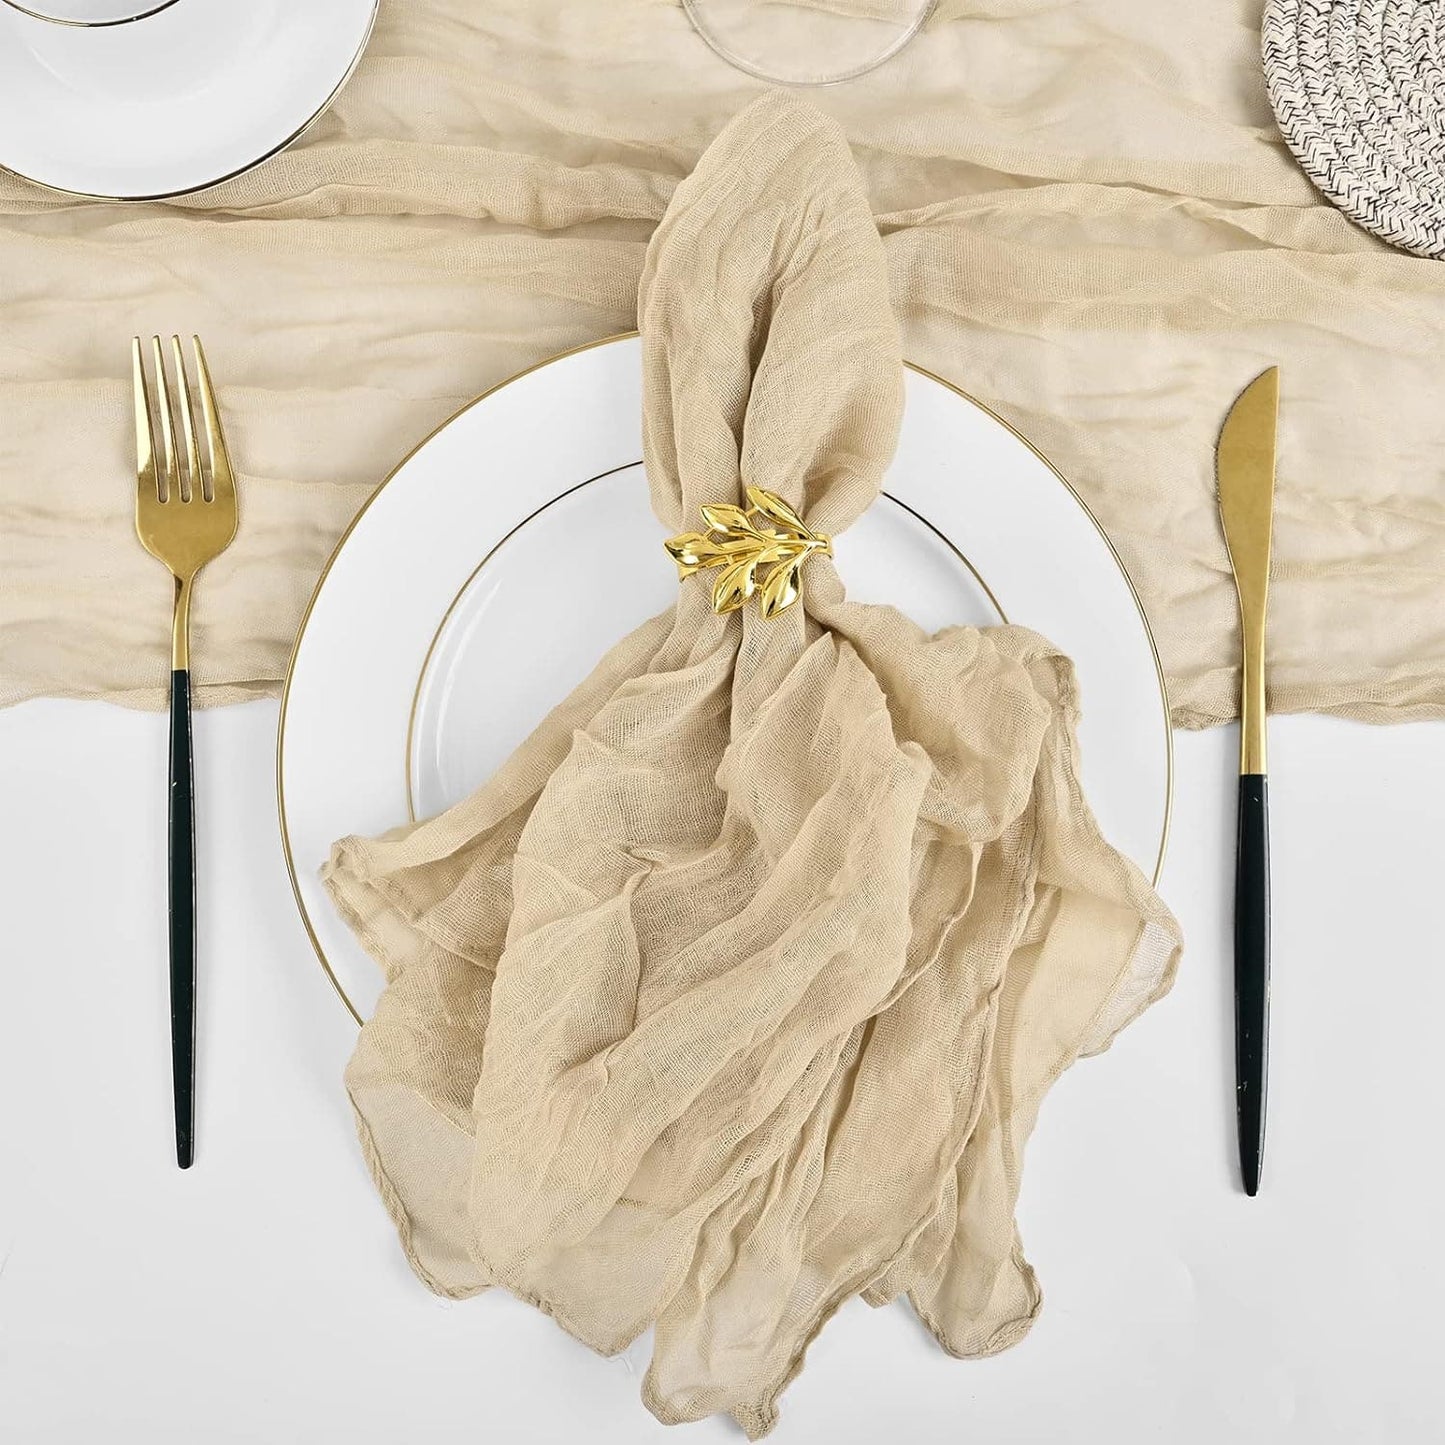 30 /60 Pack Dinner Napkins Cheesecloth Napkins